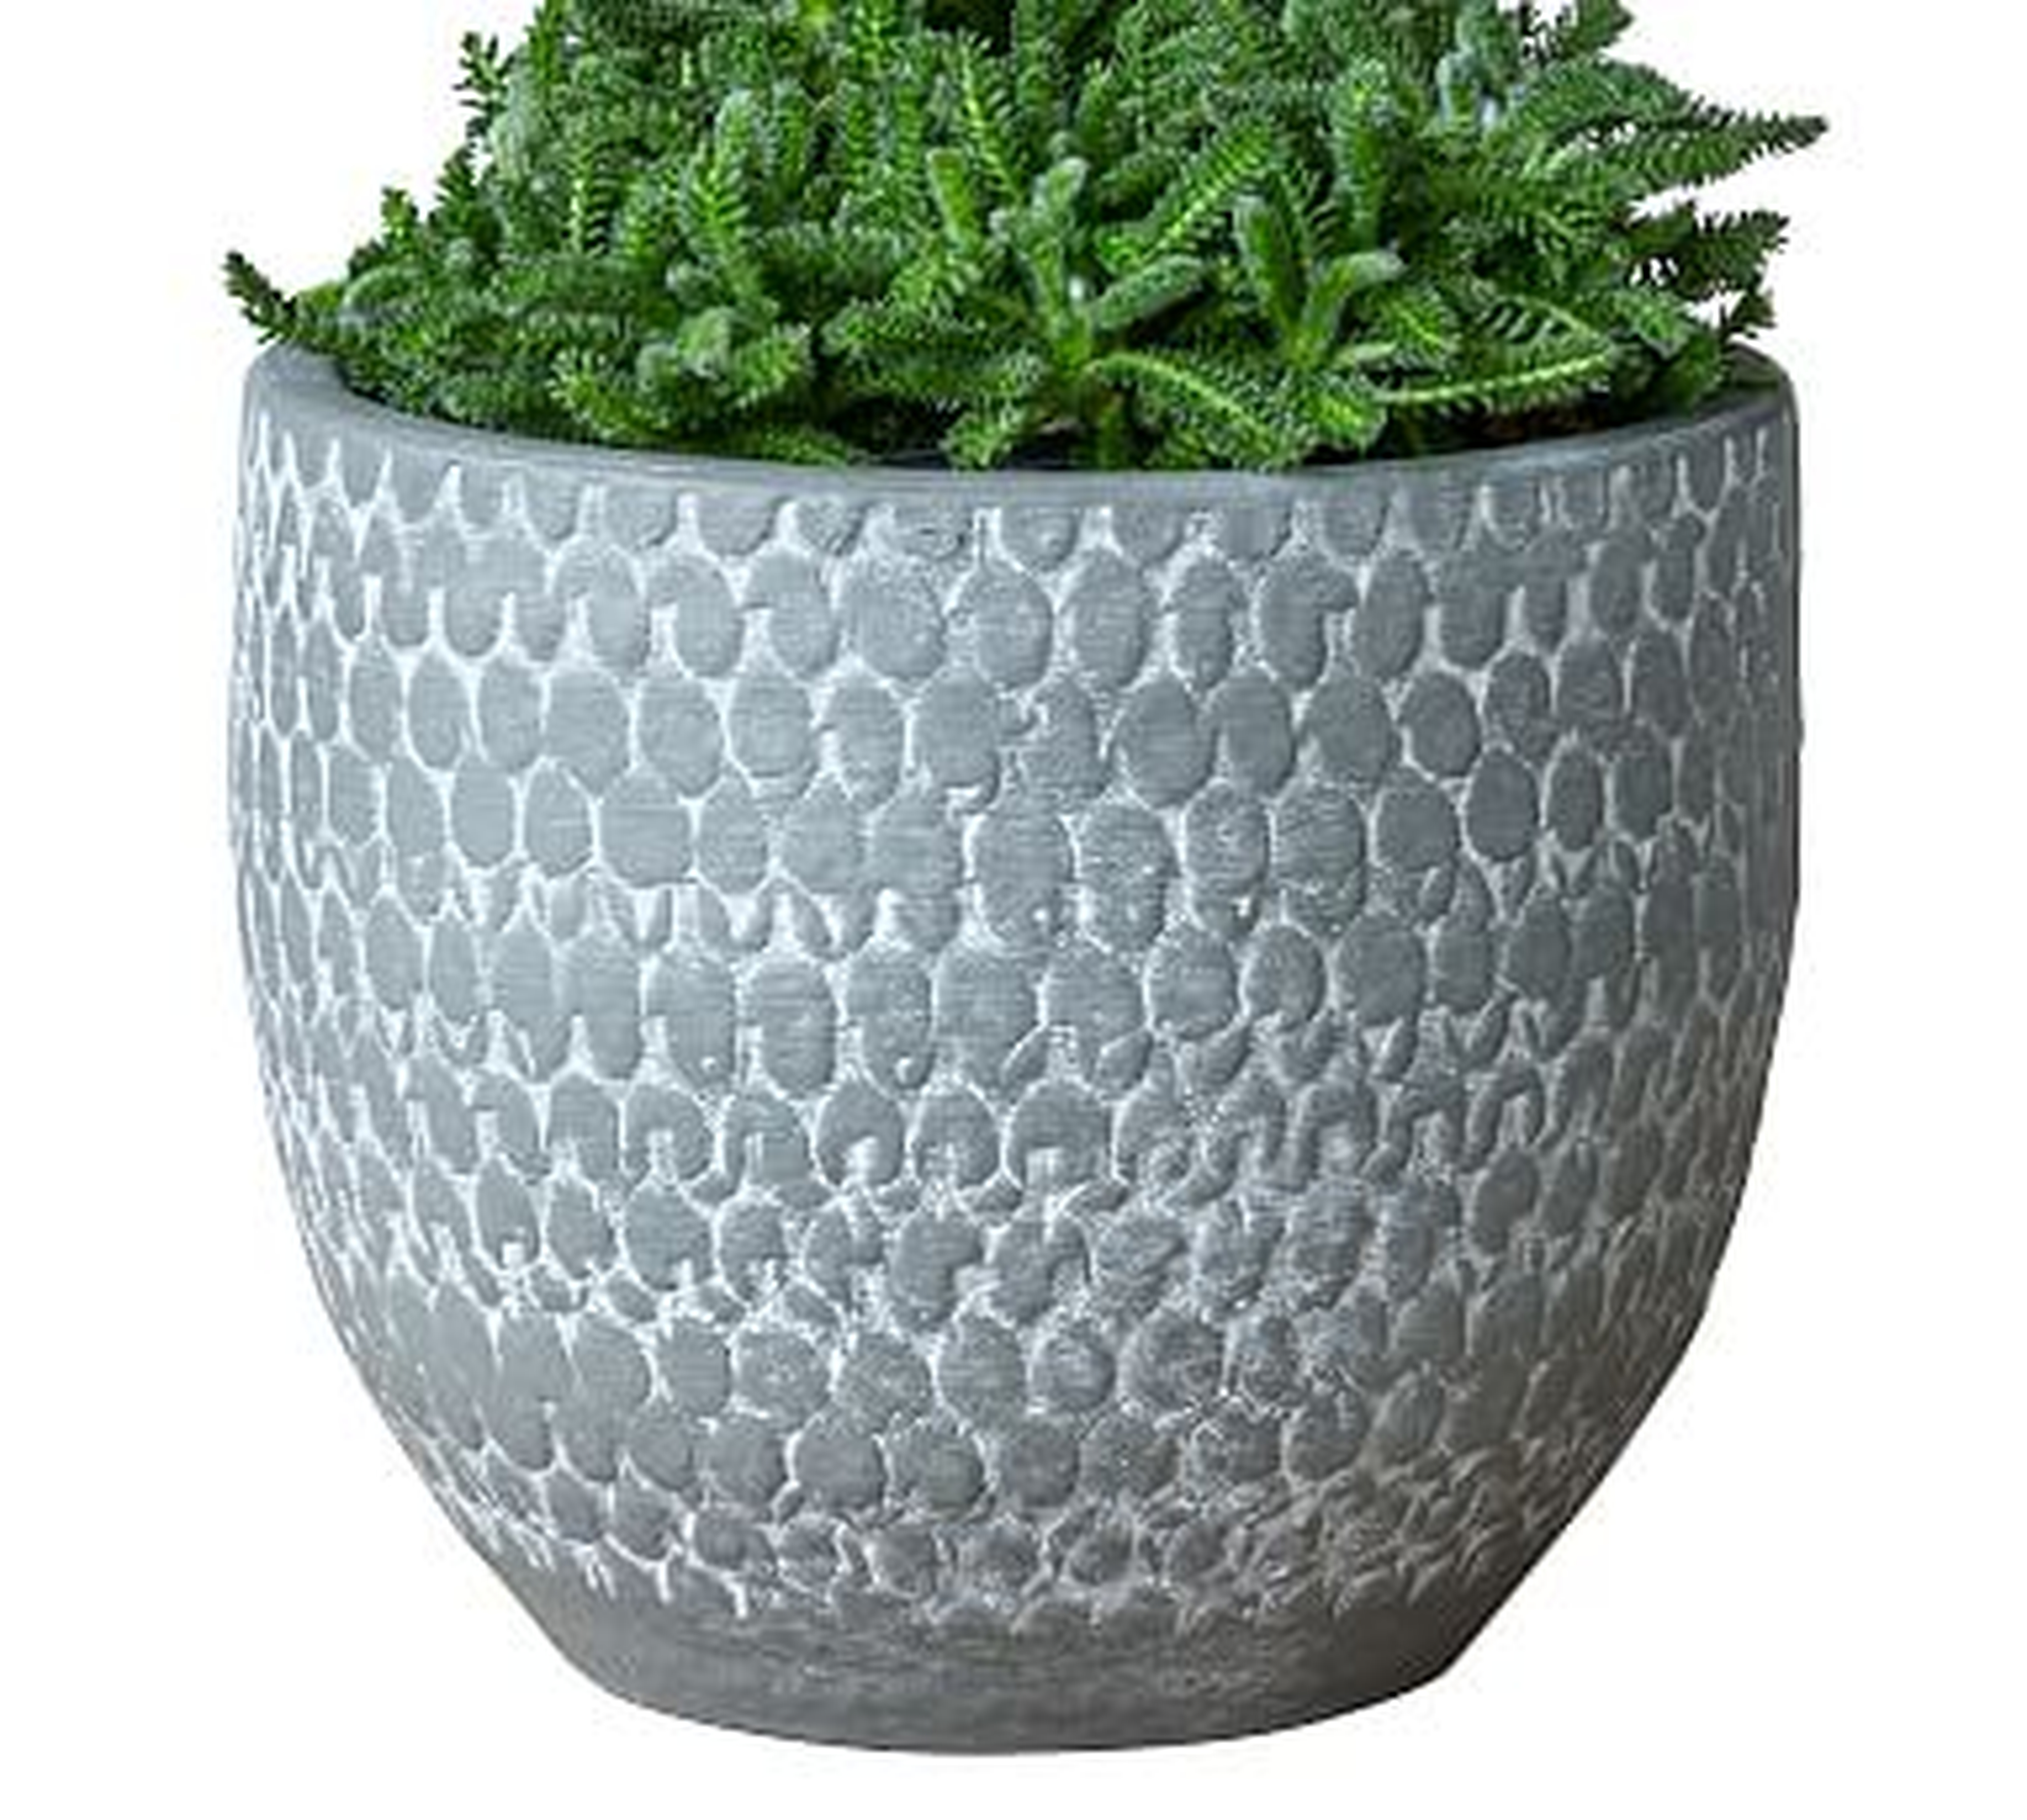 Haisley Painted Terra Cotta Planter, Gray - Large Round - Pottery Barn